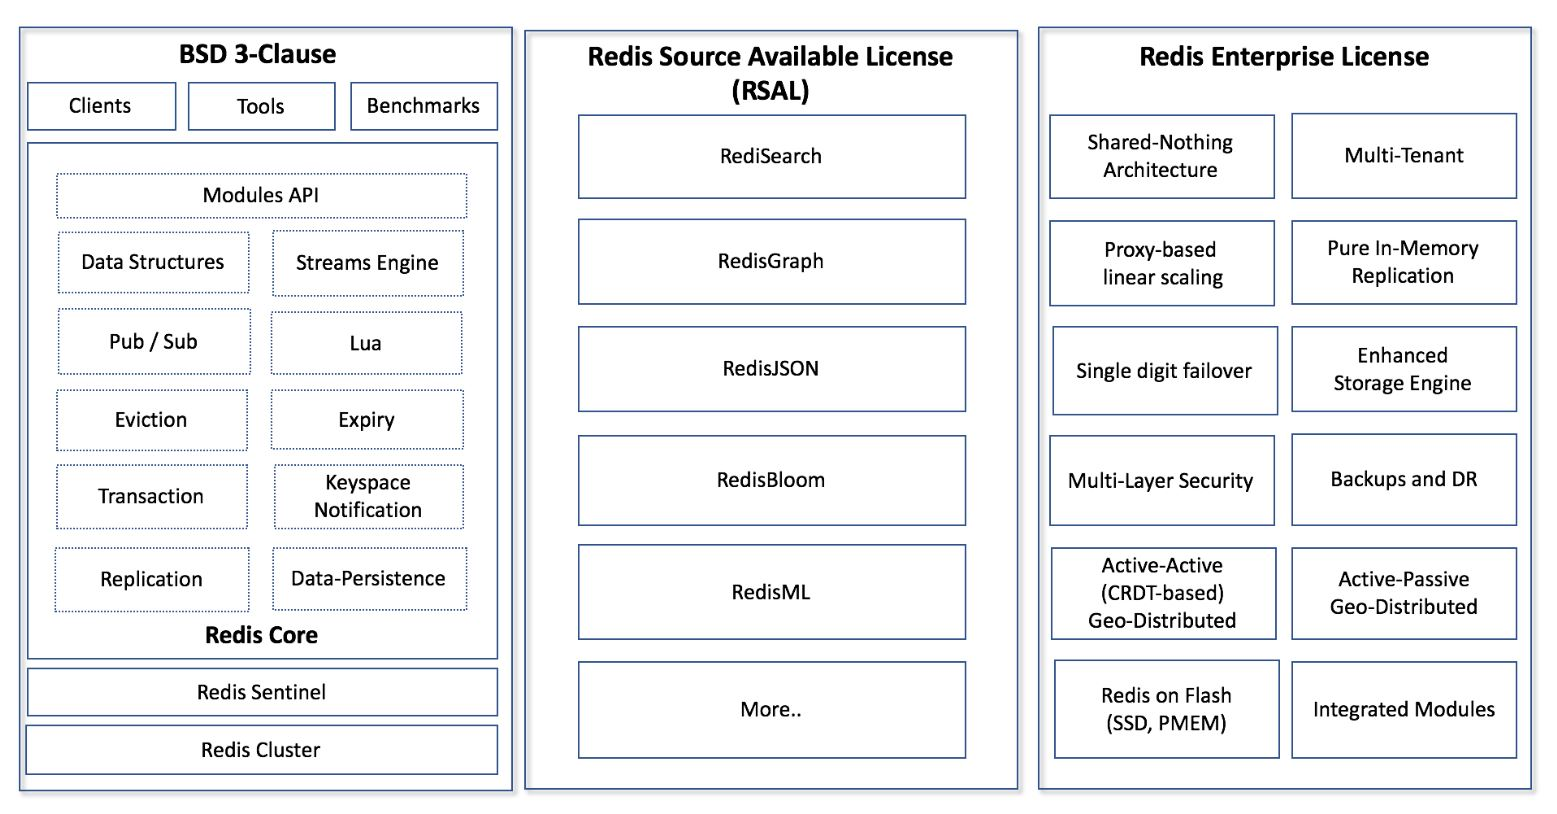 Redis Licensing Overview